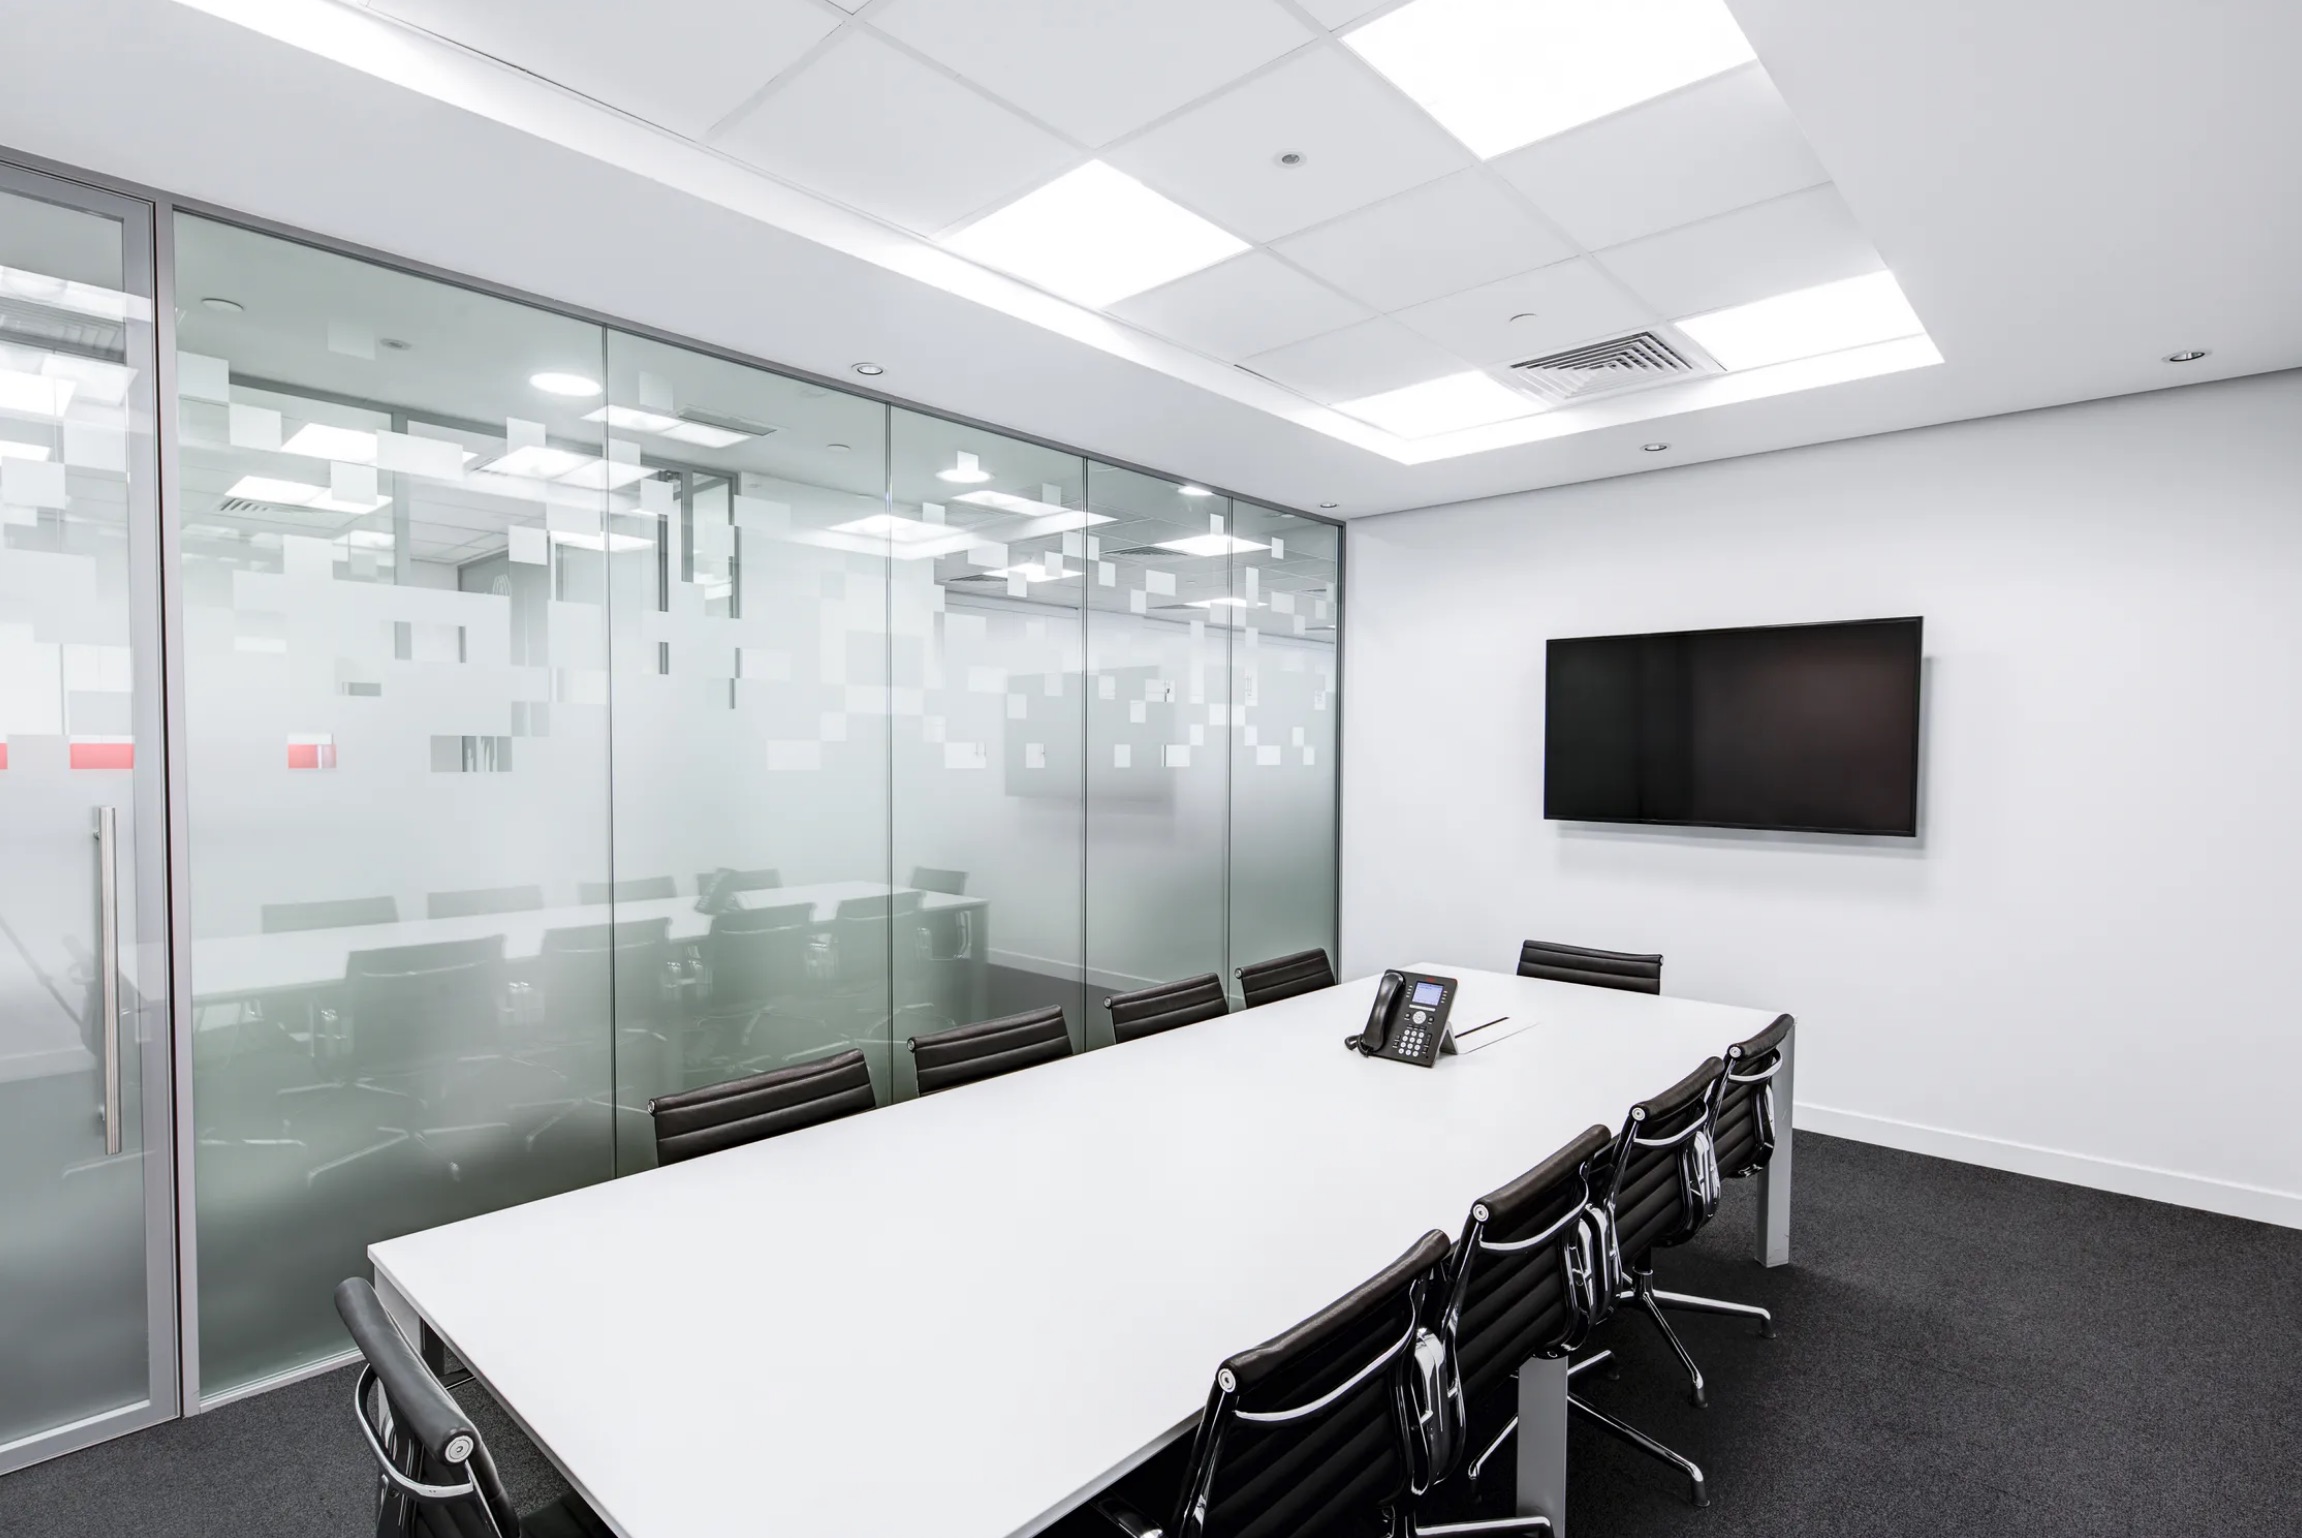 A conference room that appears to be clean